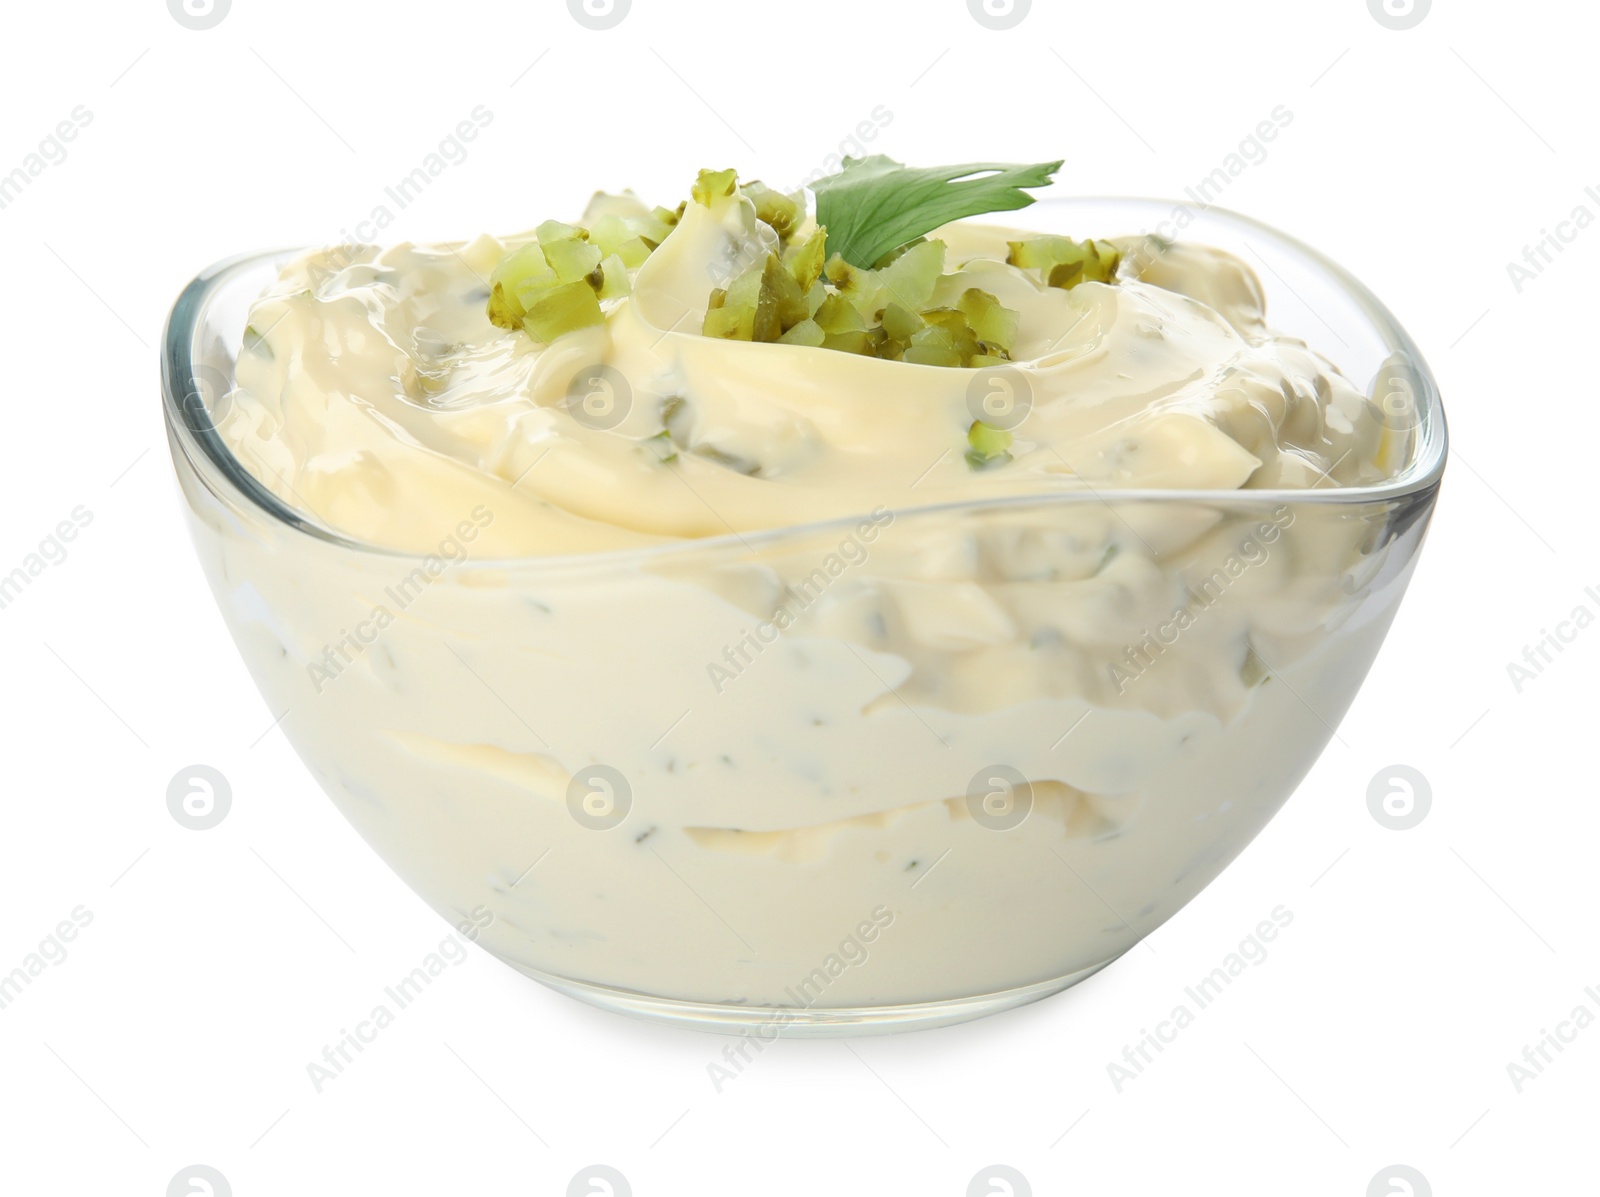 Photo of Tartar sauce in glass bowl isolated on white